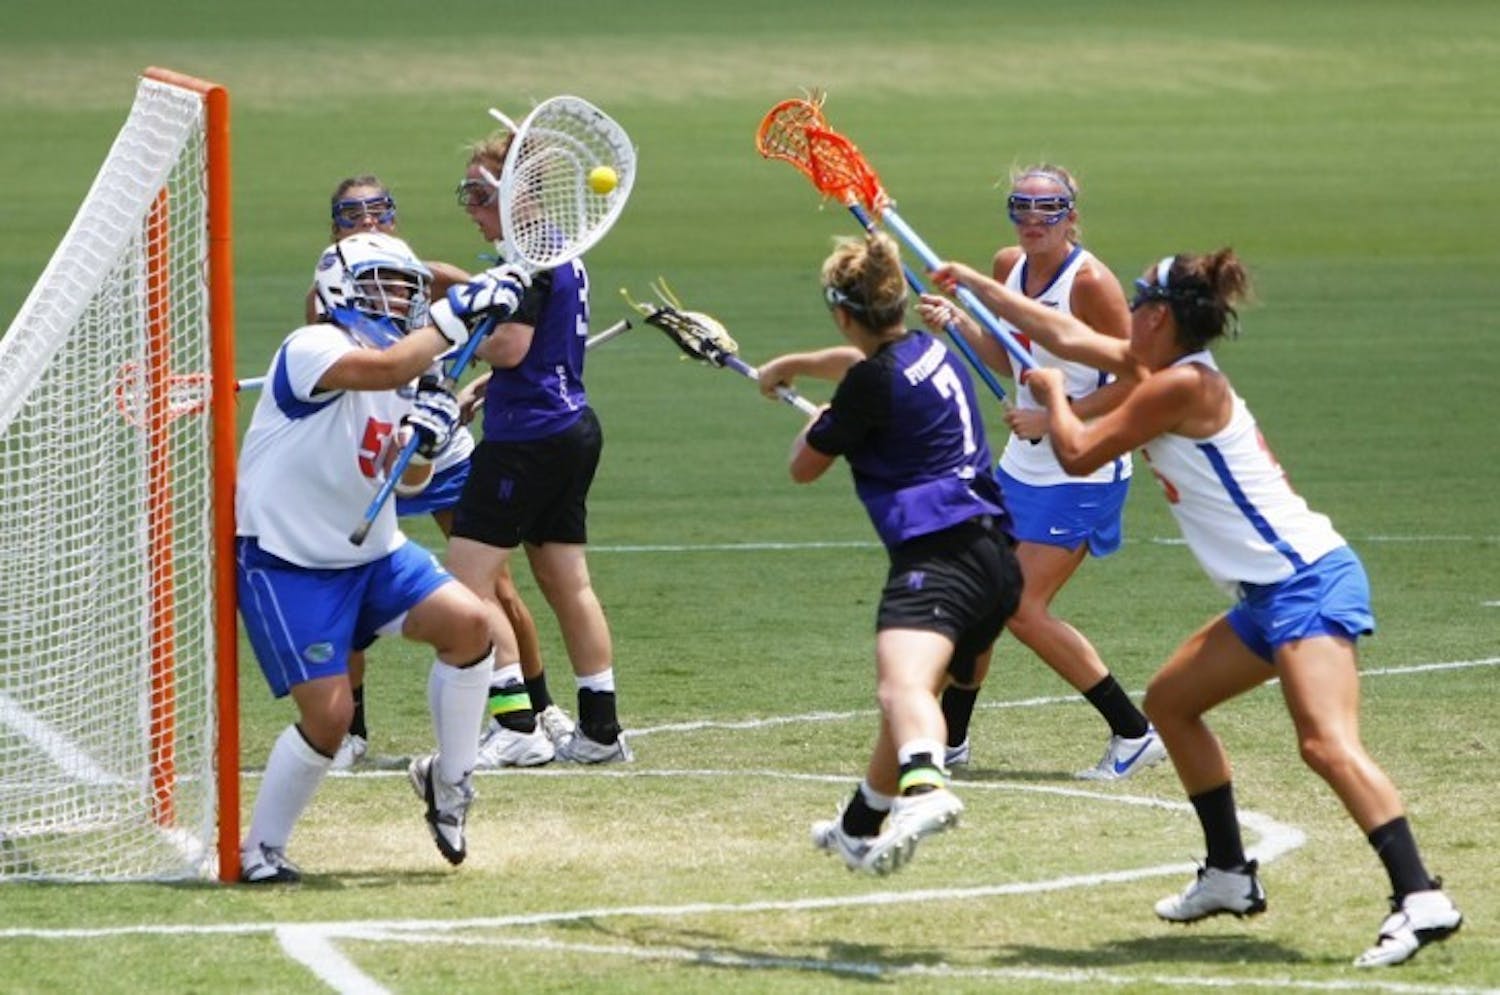 Mikey Meagher (5) defends a goal against Northwestern on May 5, 2012. Coach Amanda O'Leary pulled Meagher in the second half of Florida's loss to Penn State to give the Gators an extra defender.